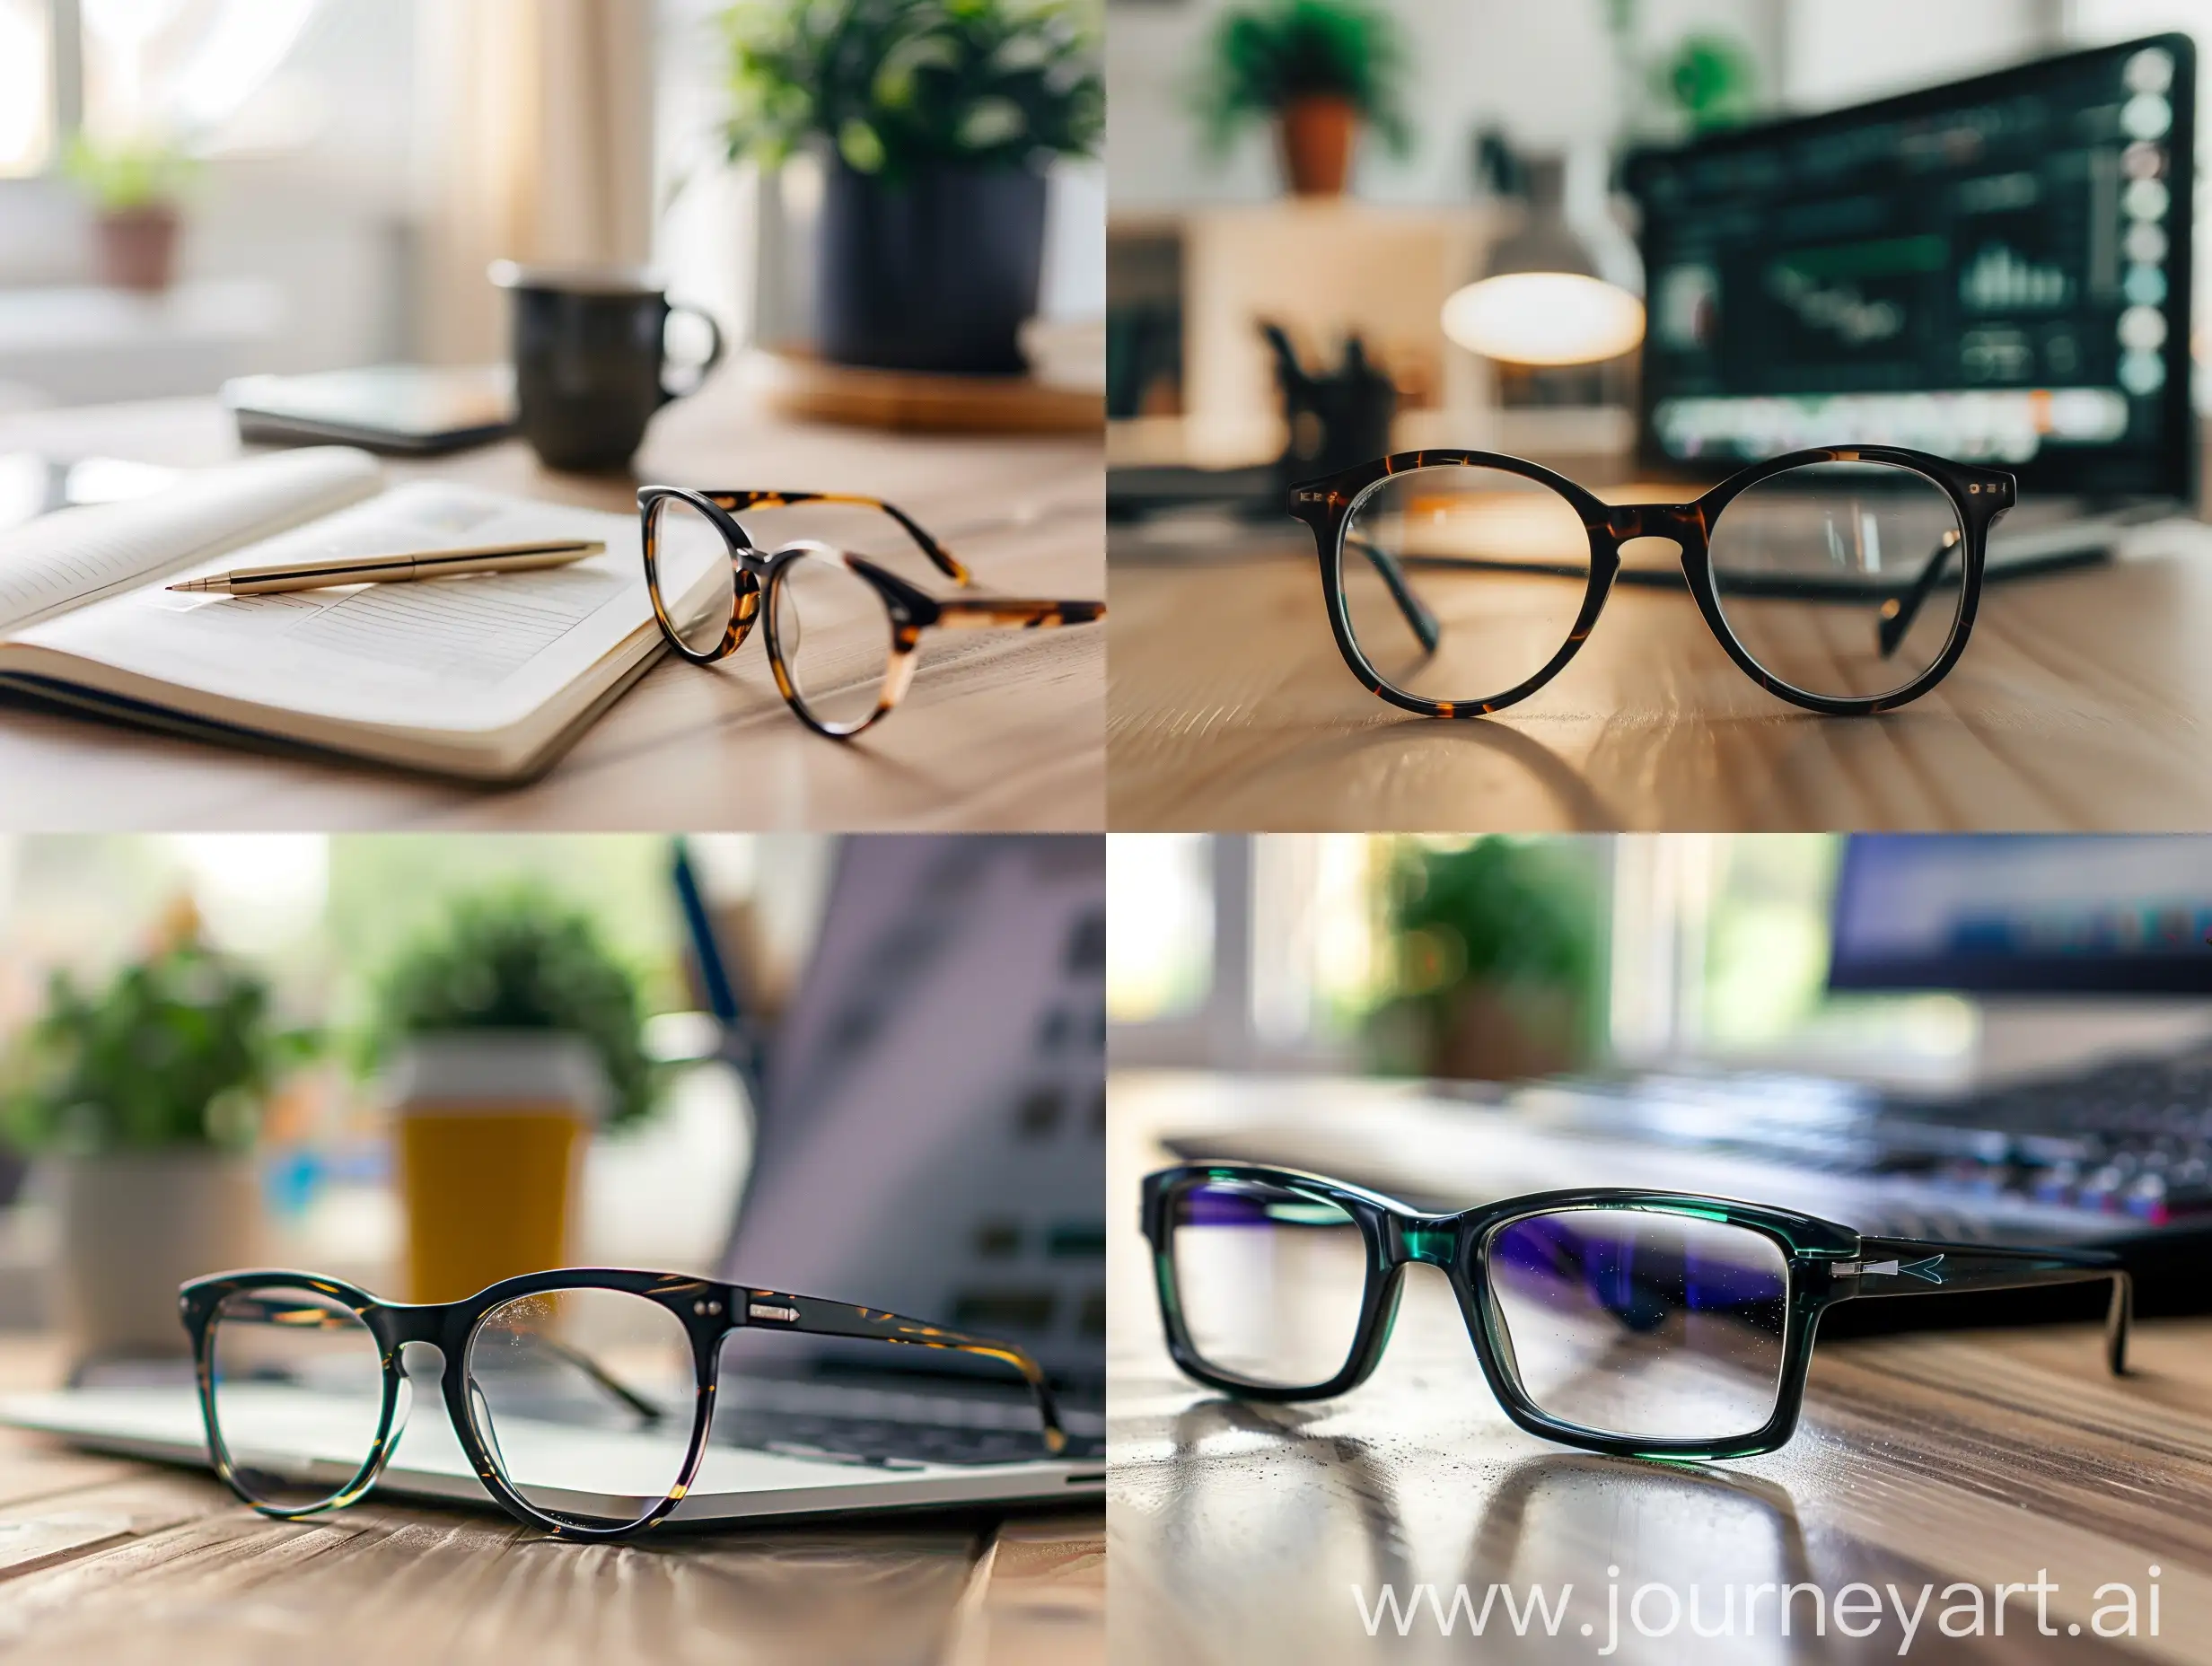 Office-Desk-with-Glasses-Abstract-Workplace-Still-Life